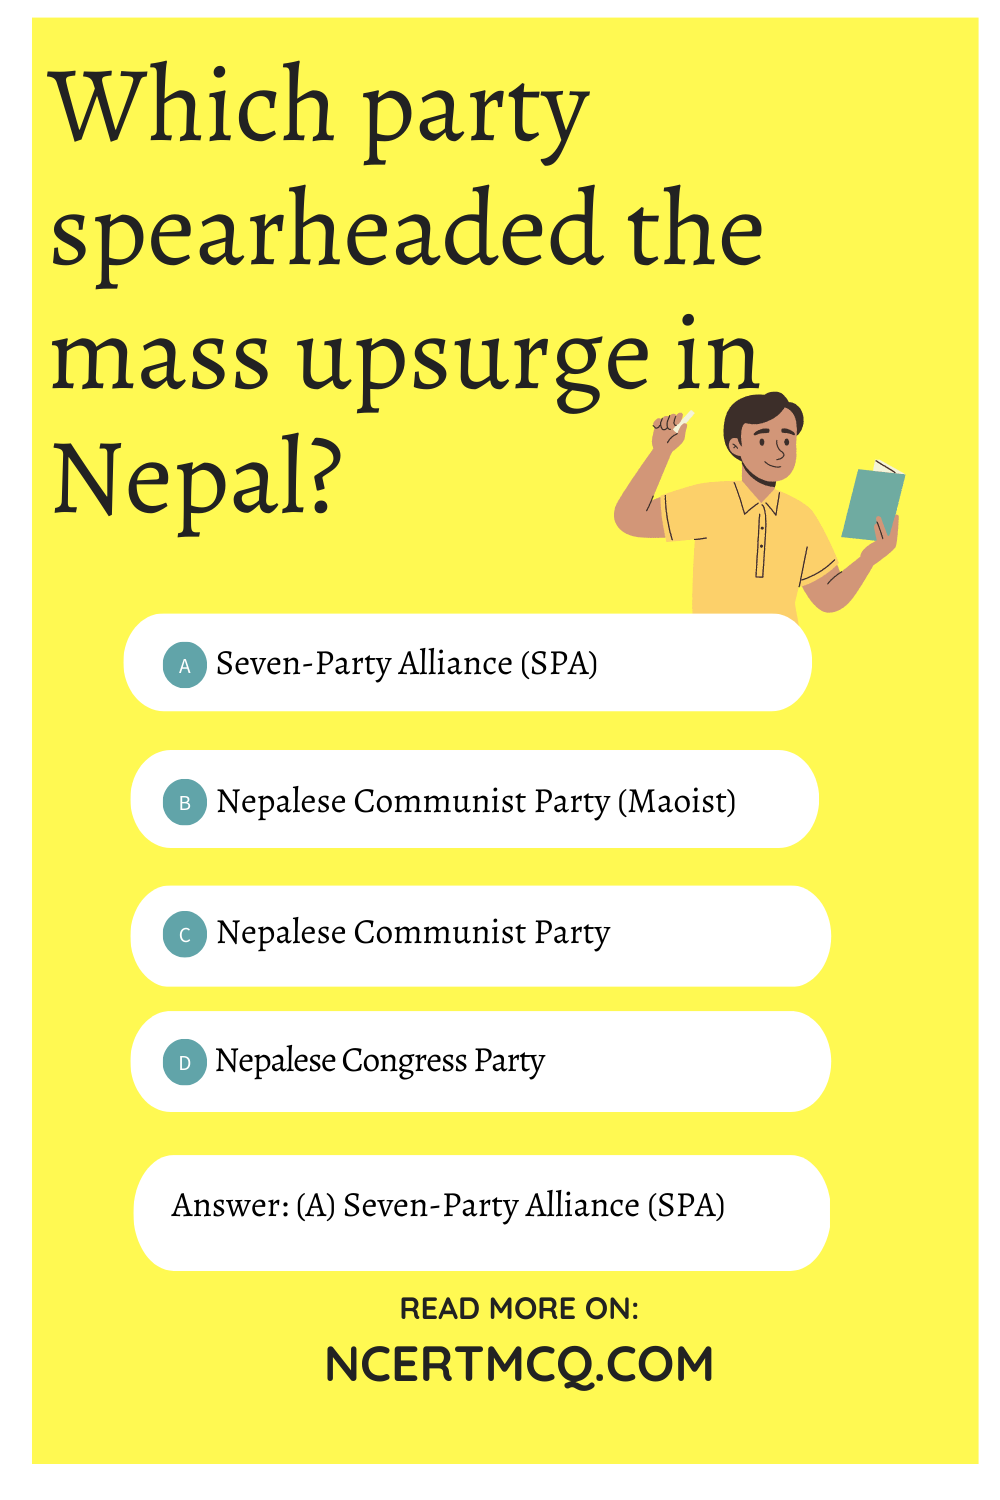 Which party spearheaded the mass upsurge in Nepal?